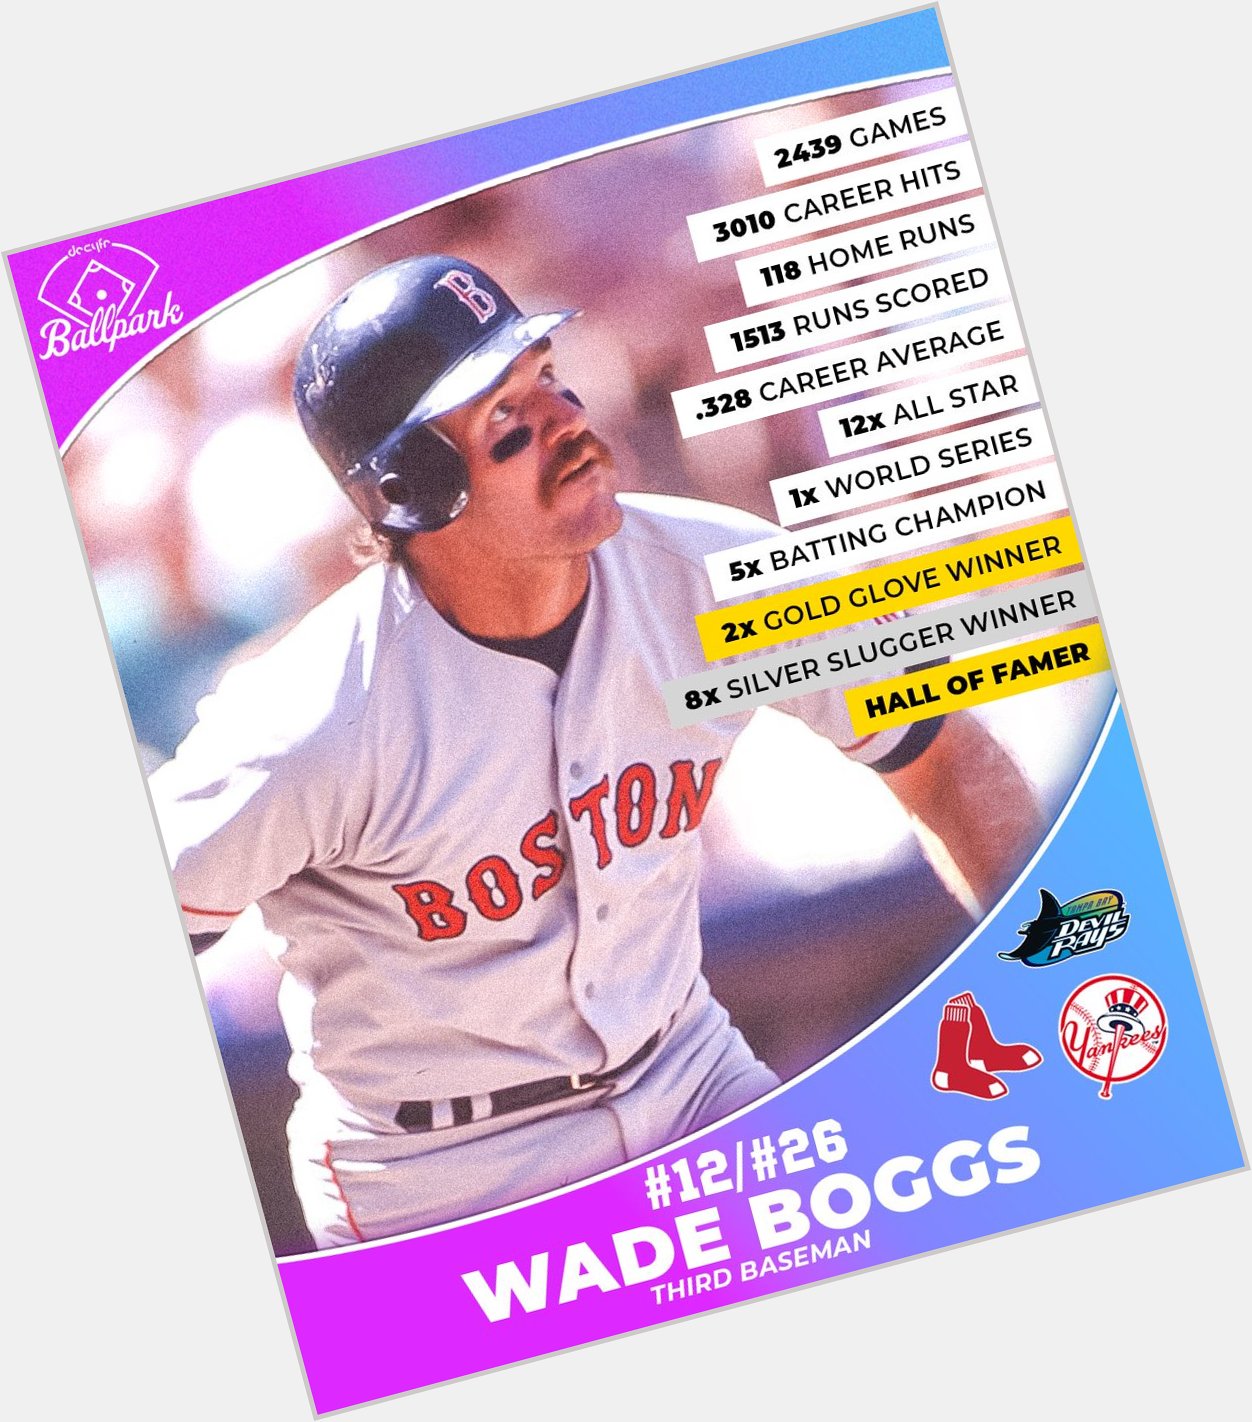 Happy birthday to and legend, Wade Boggs!    